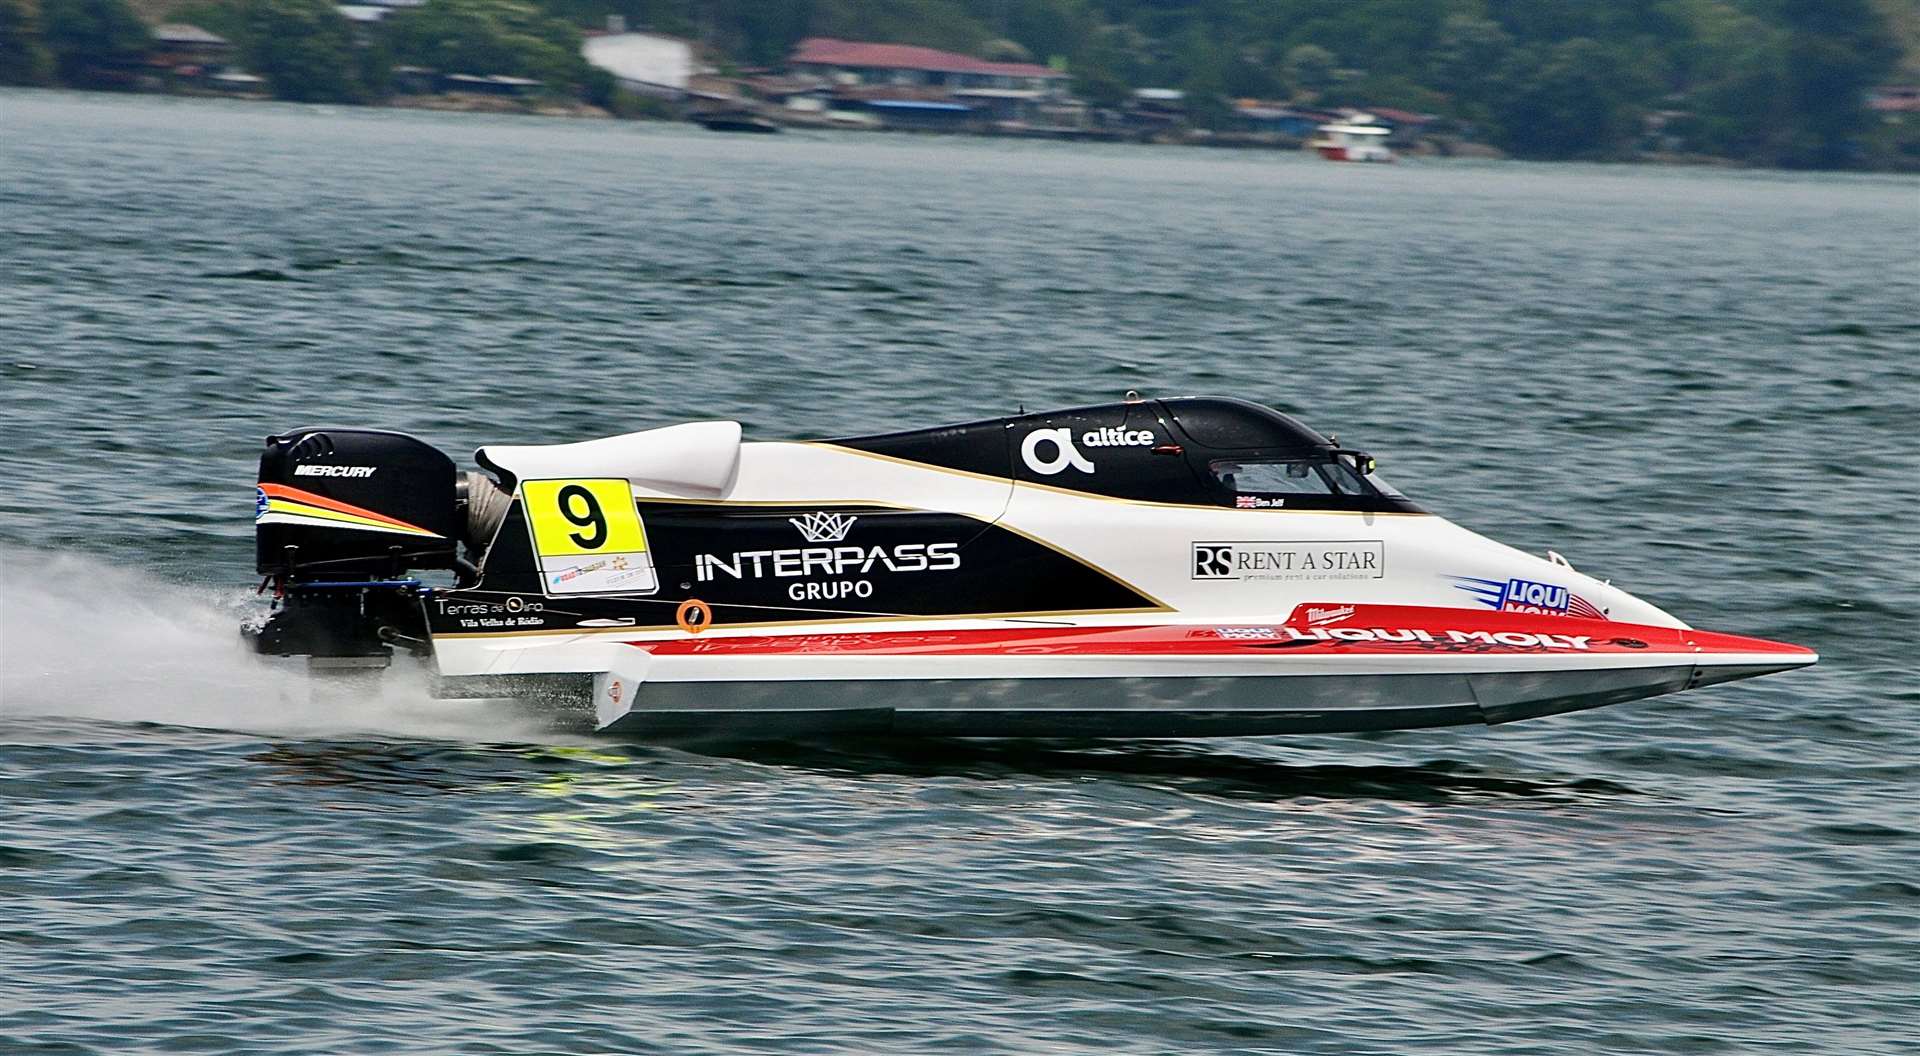 Maidstone's Ben Jelf in action on the waters of Lake Toba. Picture: Jelf Racing